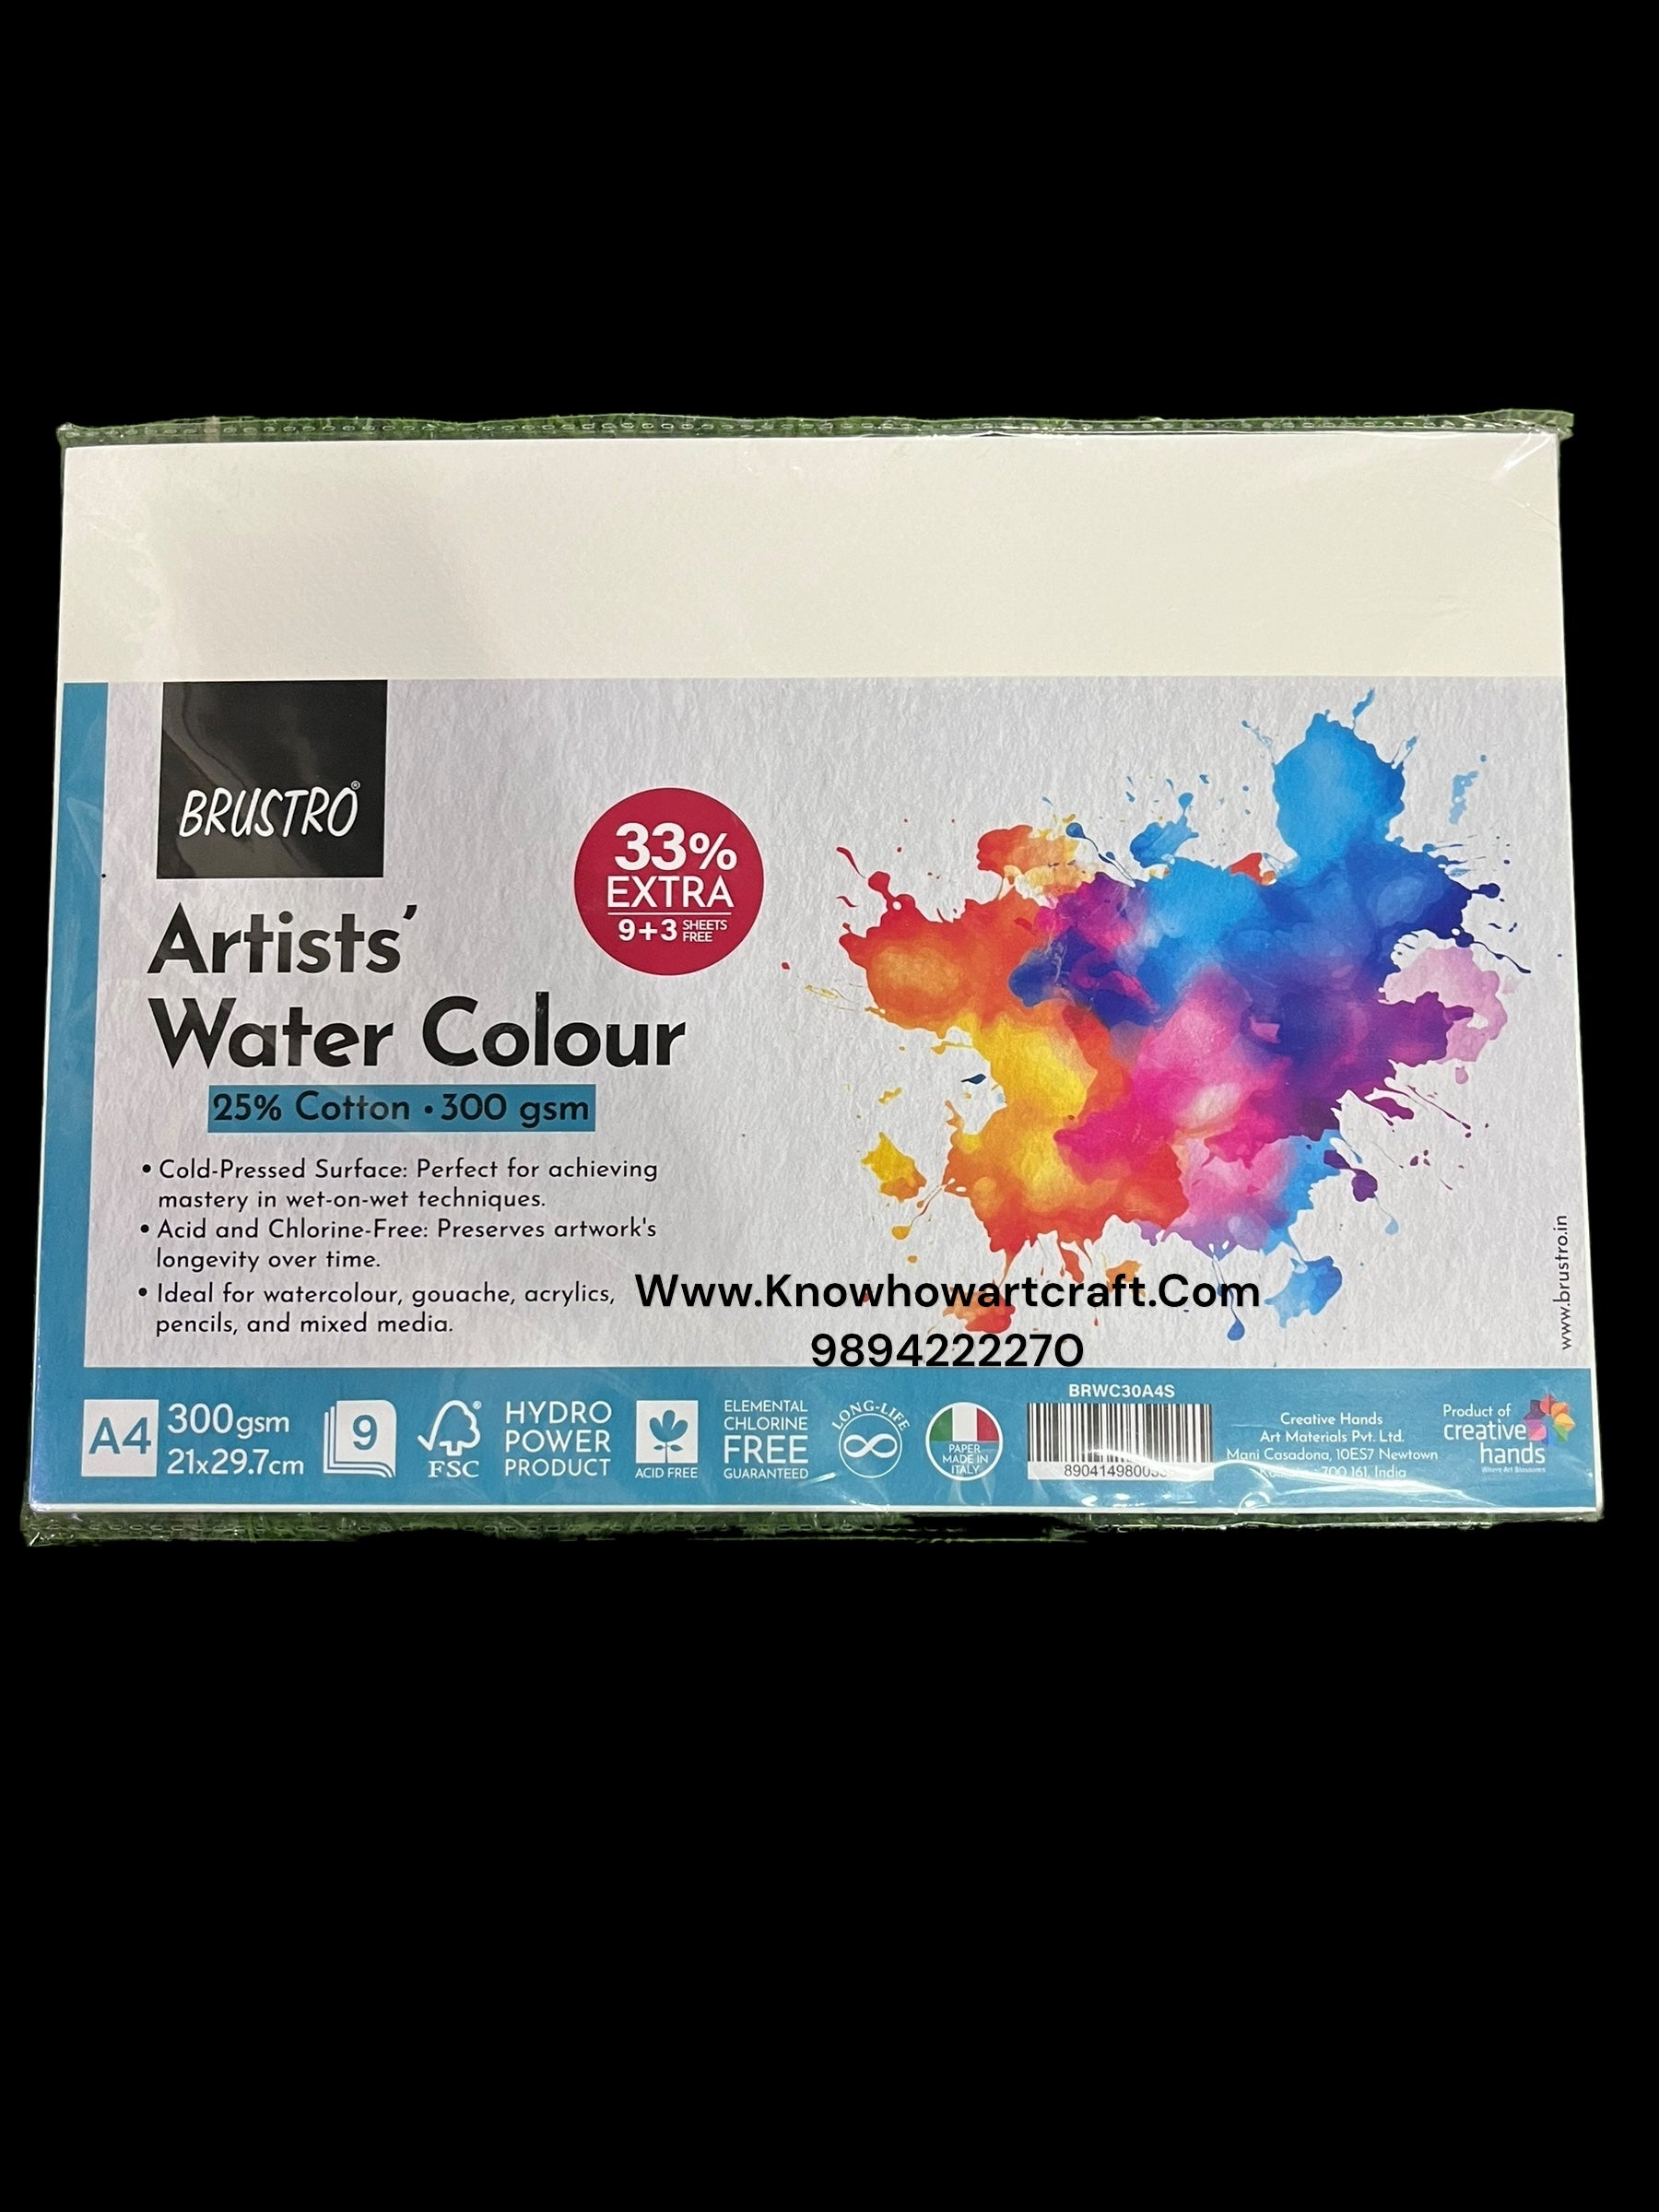 Brustro Artists water colour A4 size 300 gsm